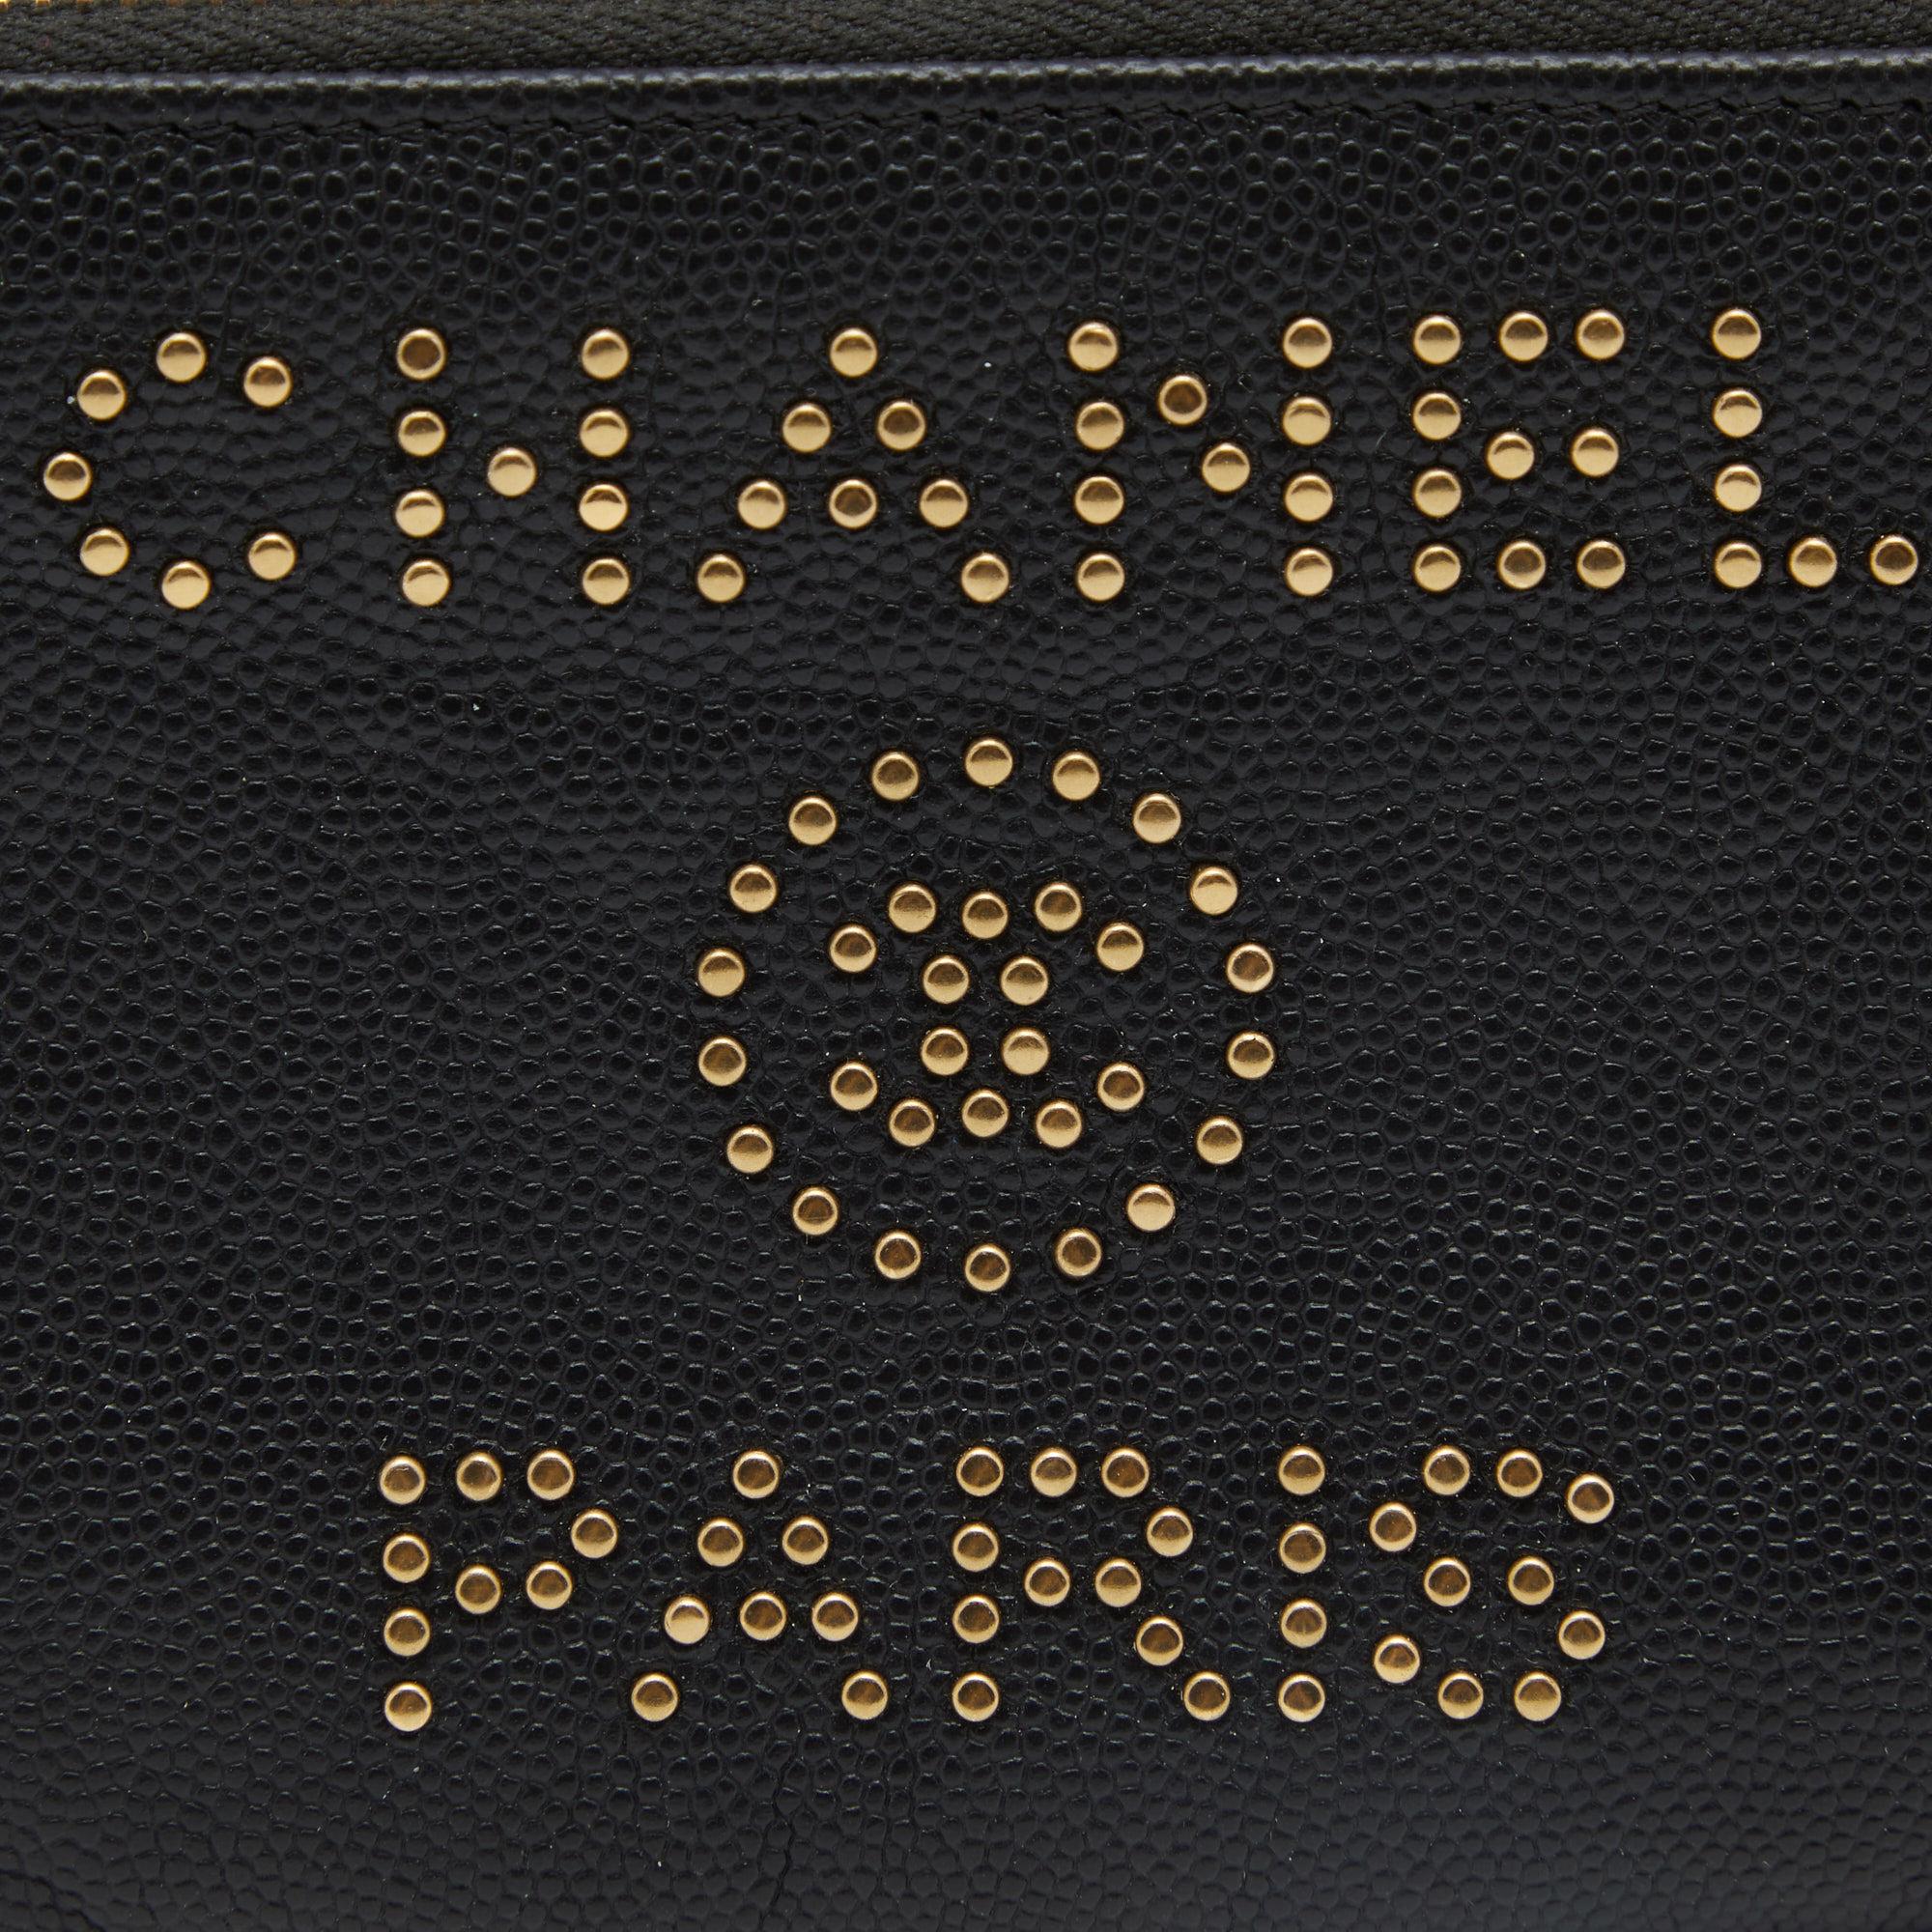 Chanel Black Caviar Leather Deauville Studded Zip Case 5